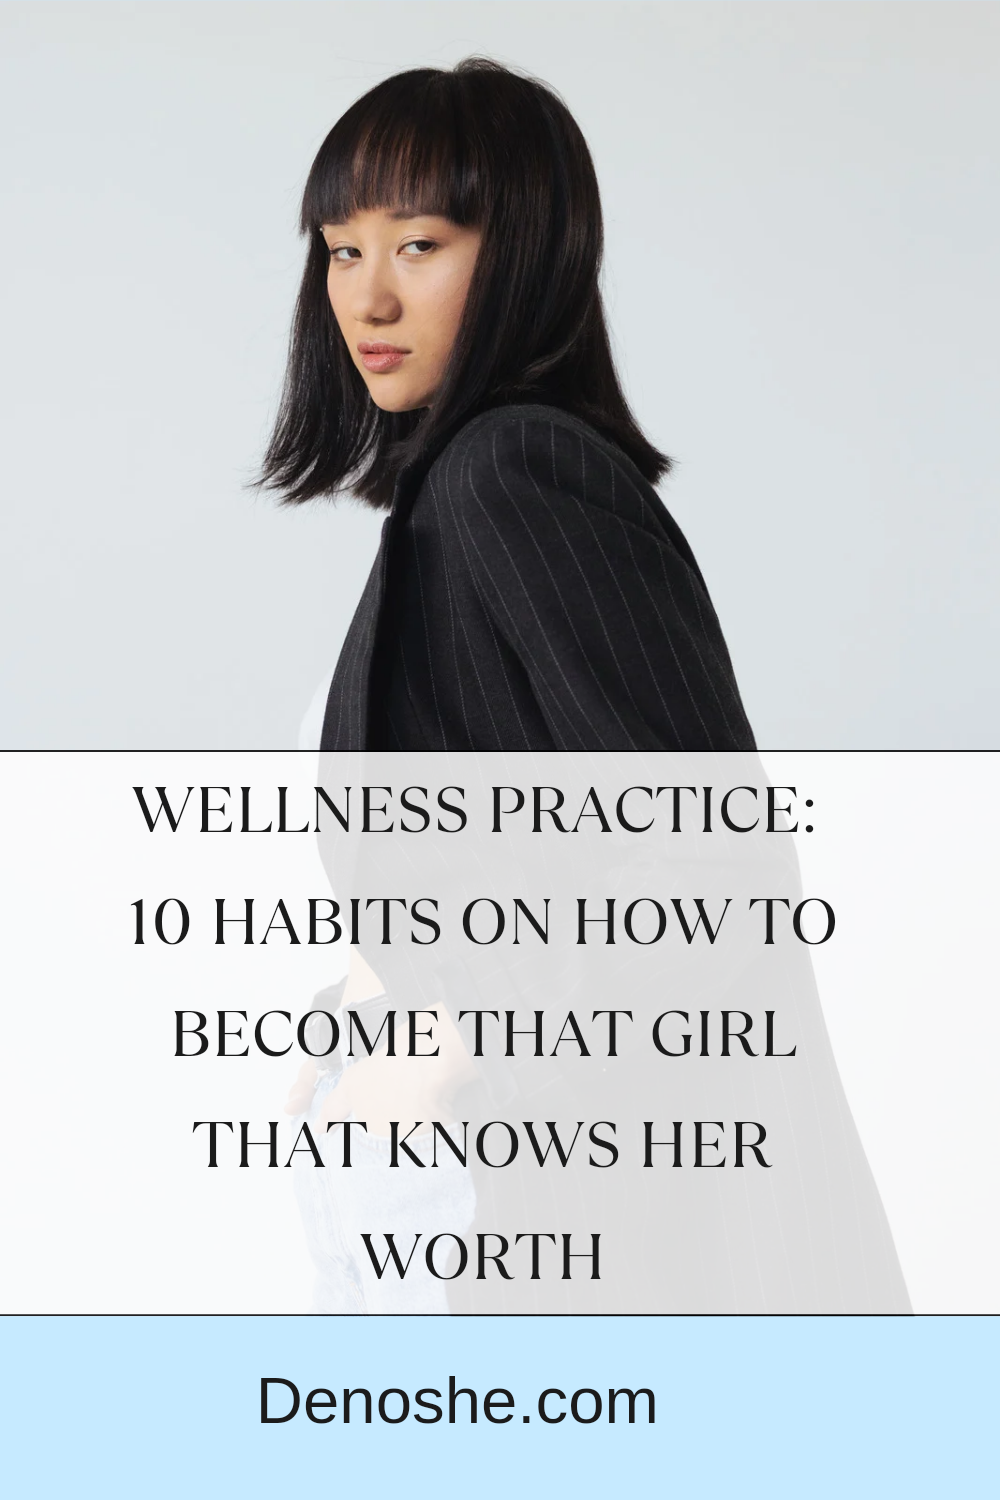 Save This For Later : wellness practice 10 habits on how to become that girl that knows her worth